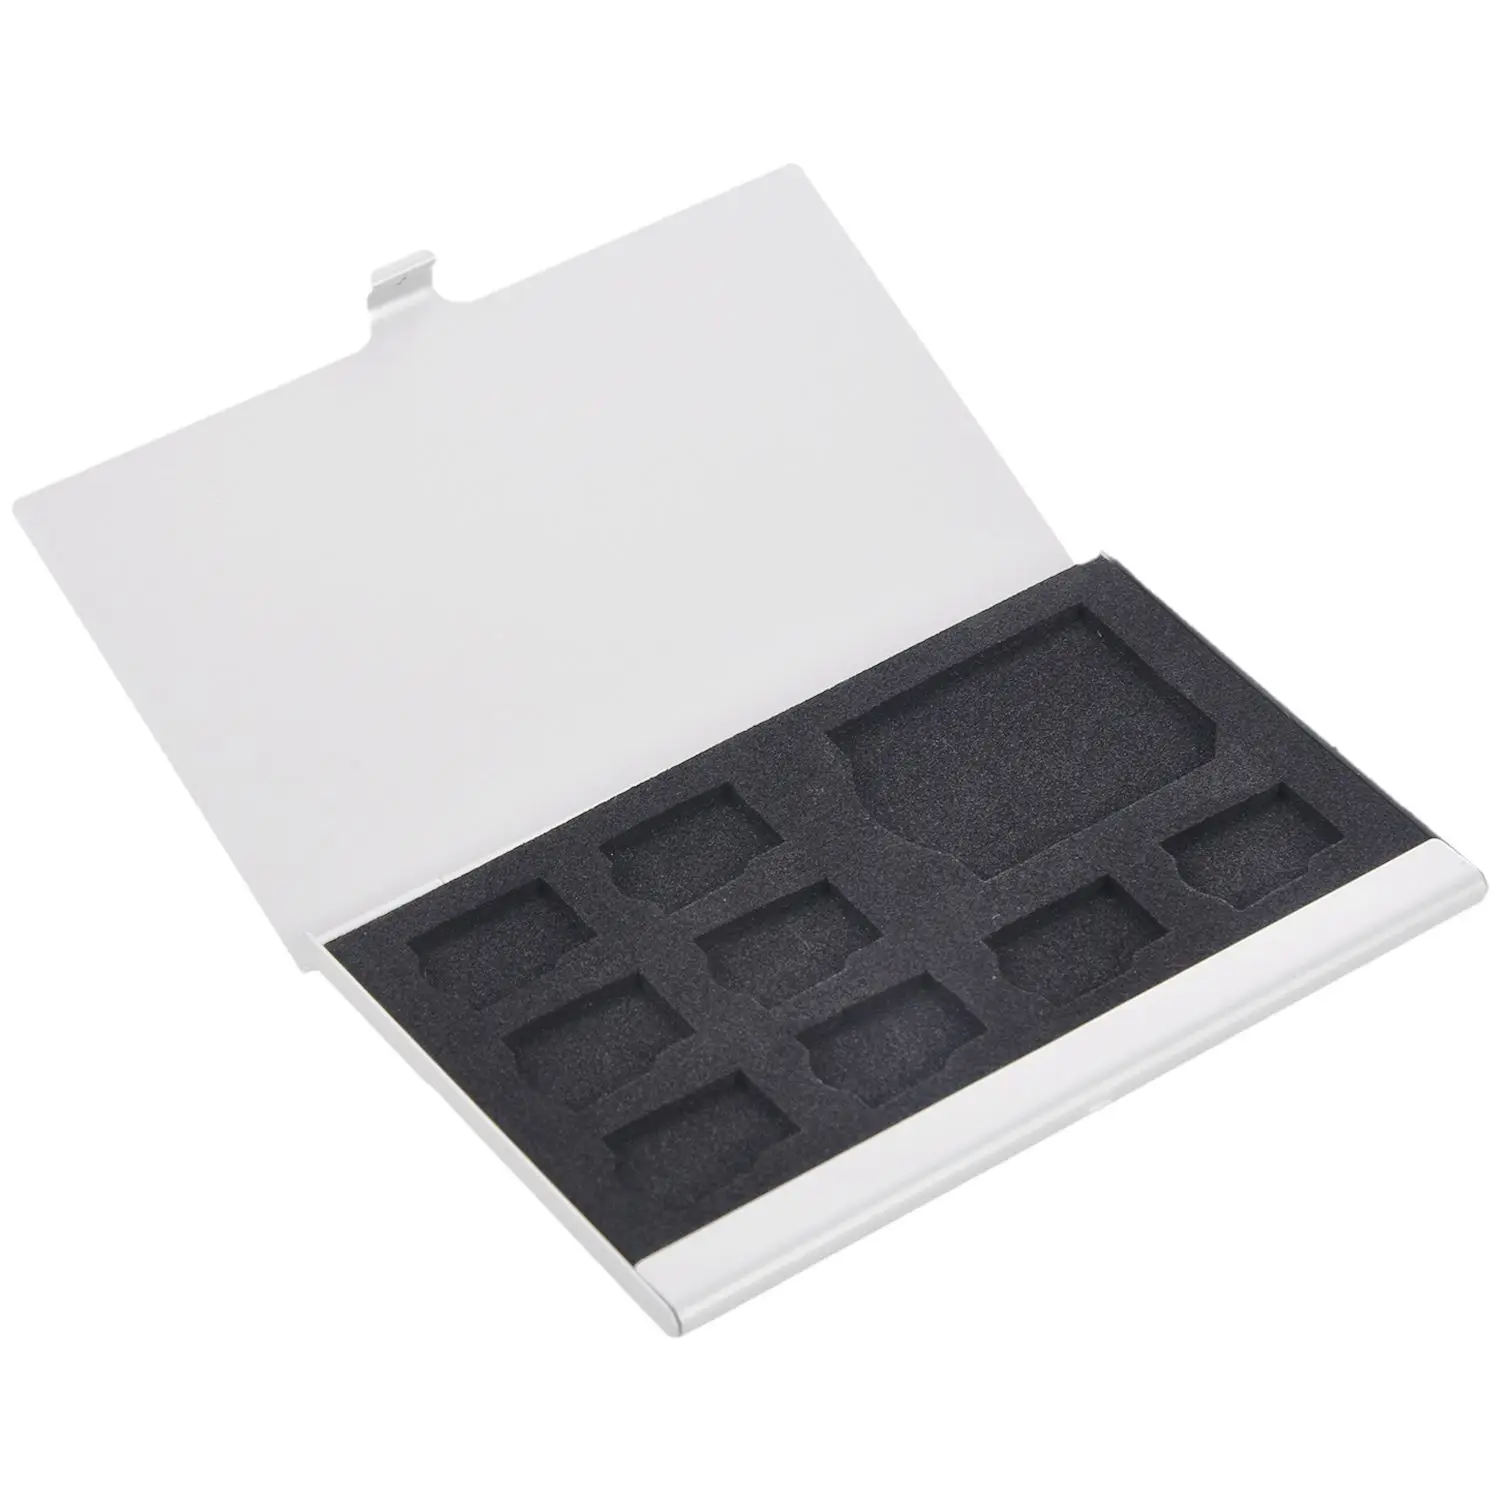 9 Micro-SD/SD Memory Card Storage Holder Box Protector Metal Cases 8 TF&1 SD